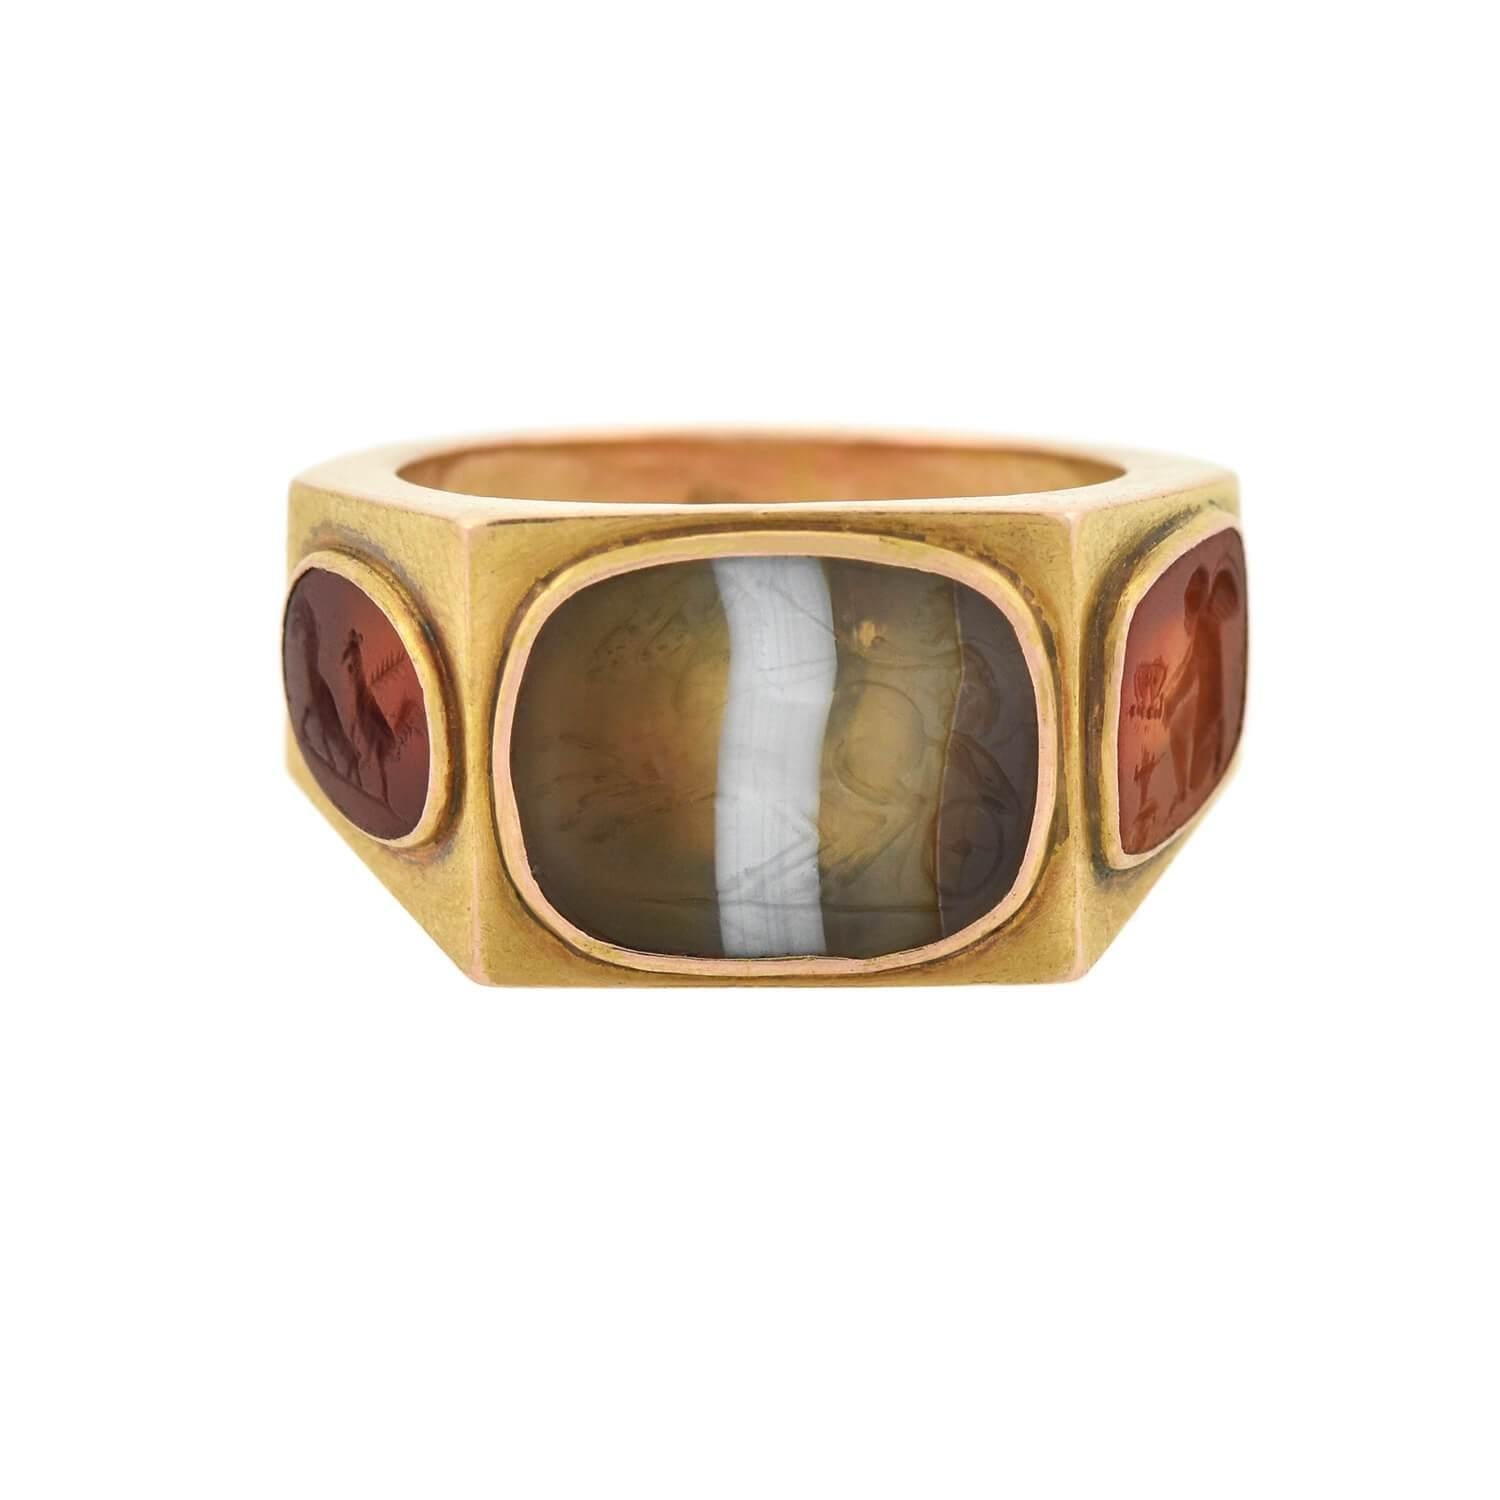 A signet ring can be represented by a smooth or engraved seal, or with an intaglio, which is created by carving into the surface of a stone. Its purpose would have been pressing into sealing wax.

A magnificent and unusual intaglio signet ring from